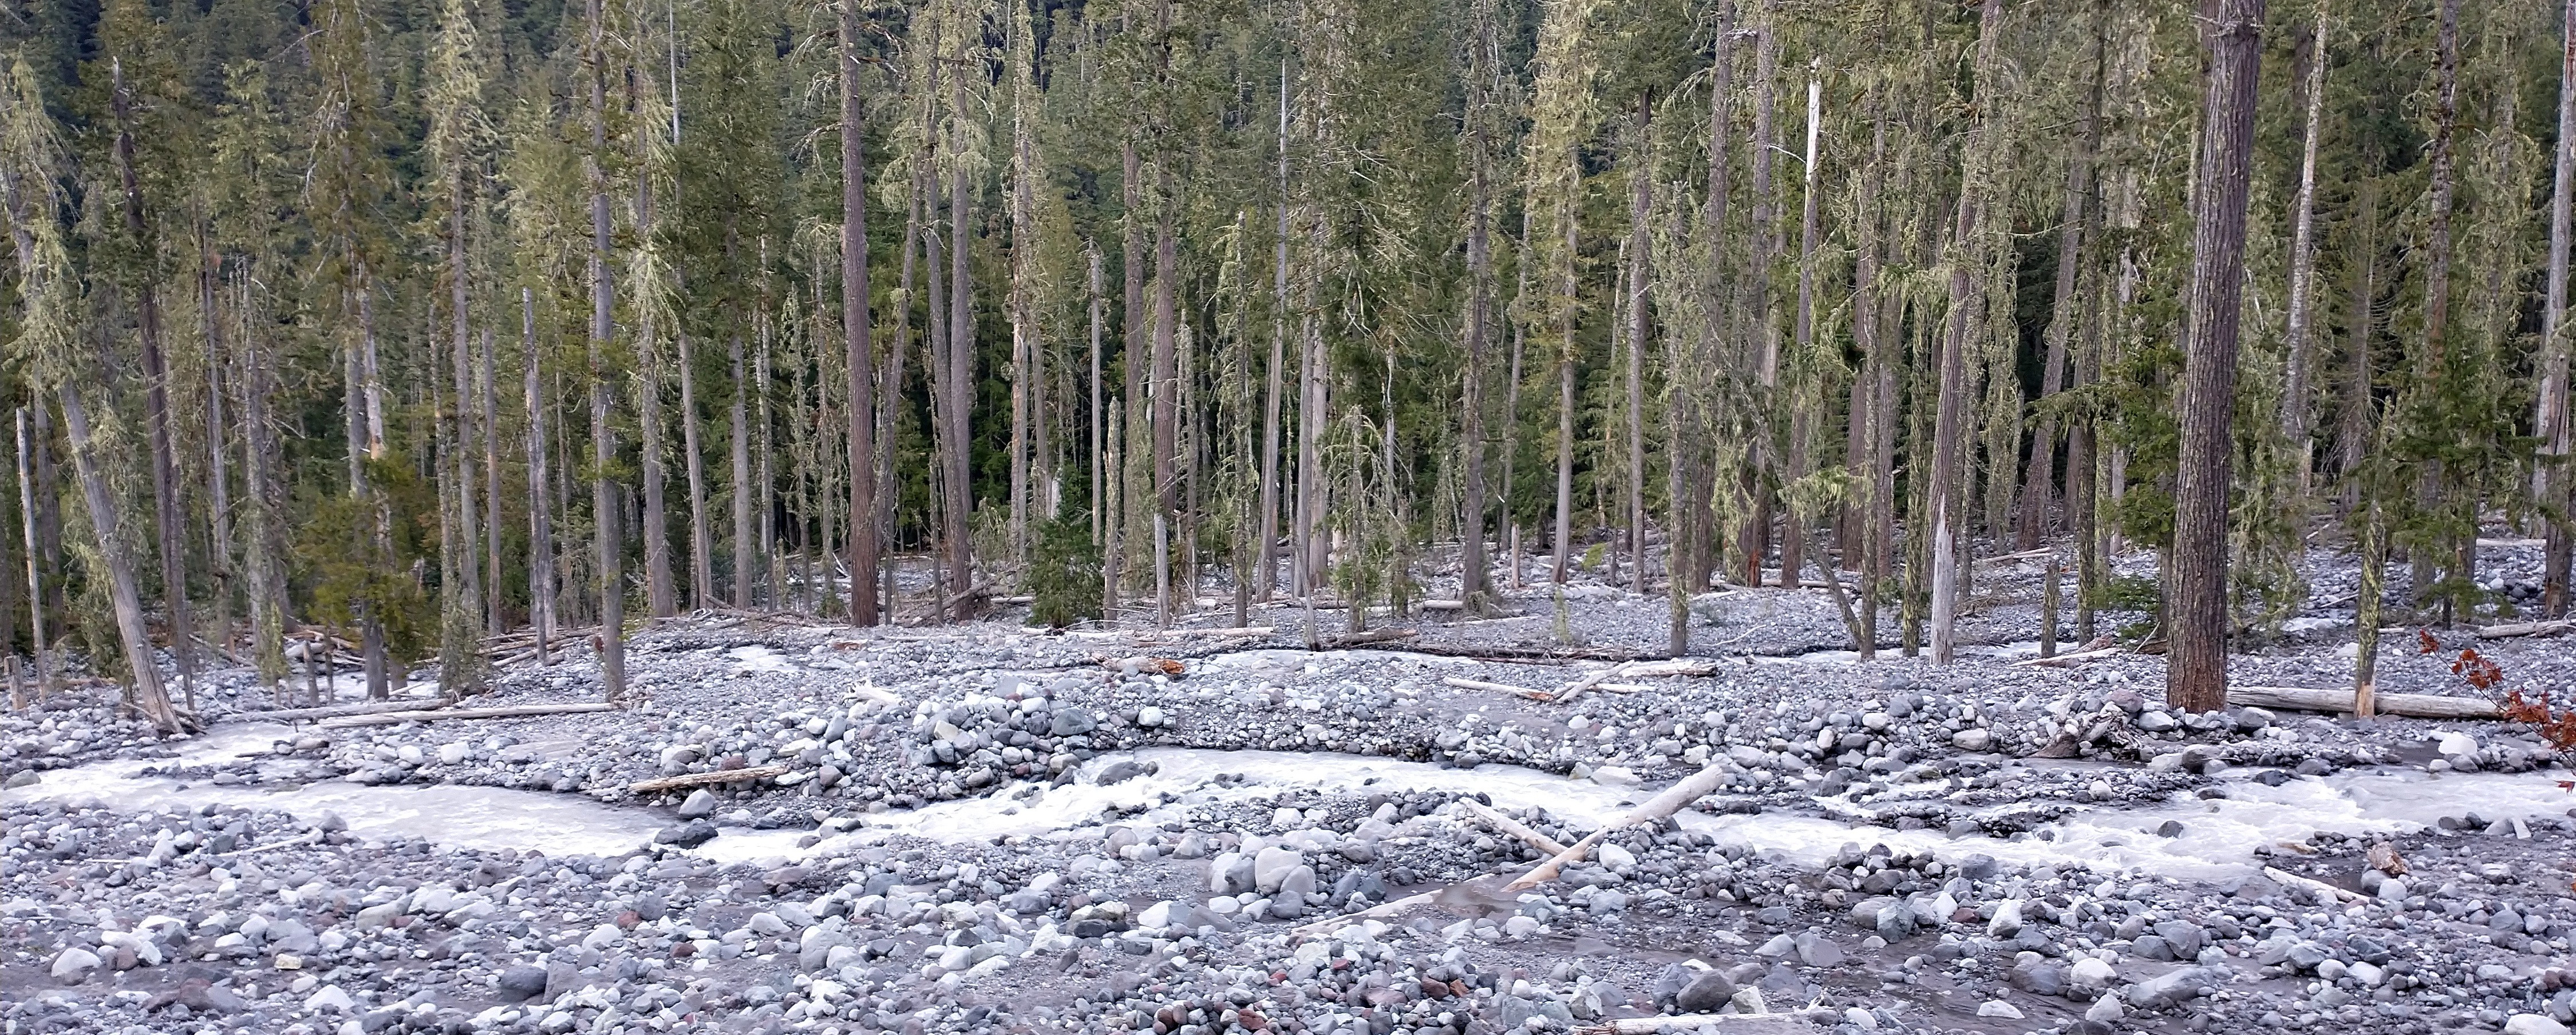 Carbon River clearing sticks